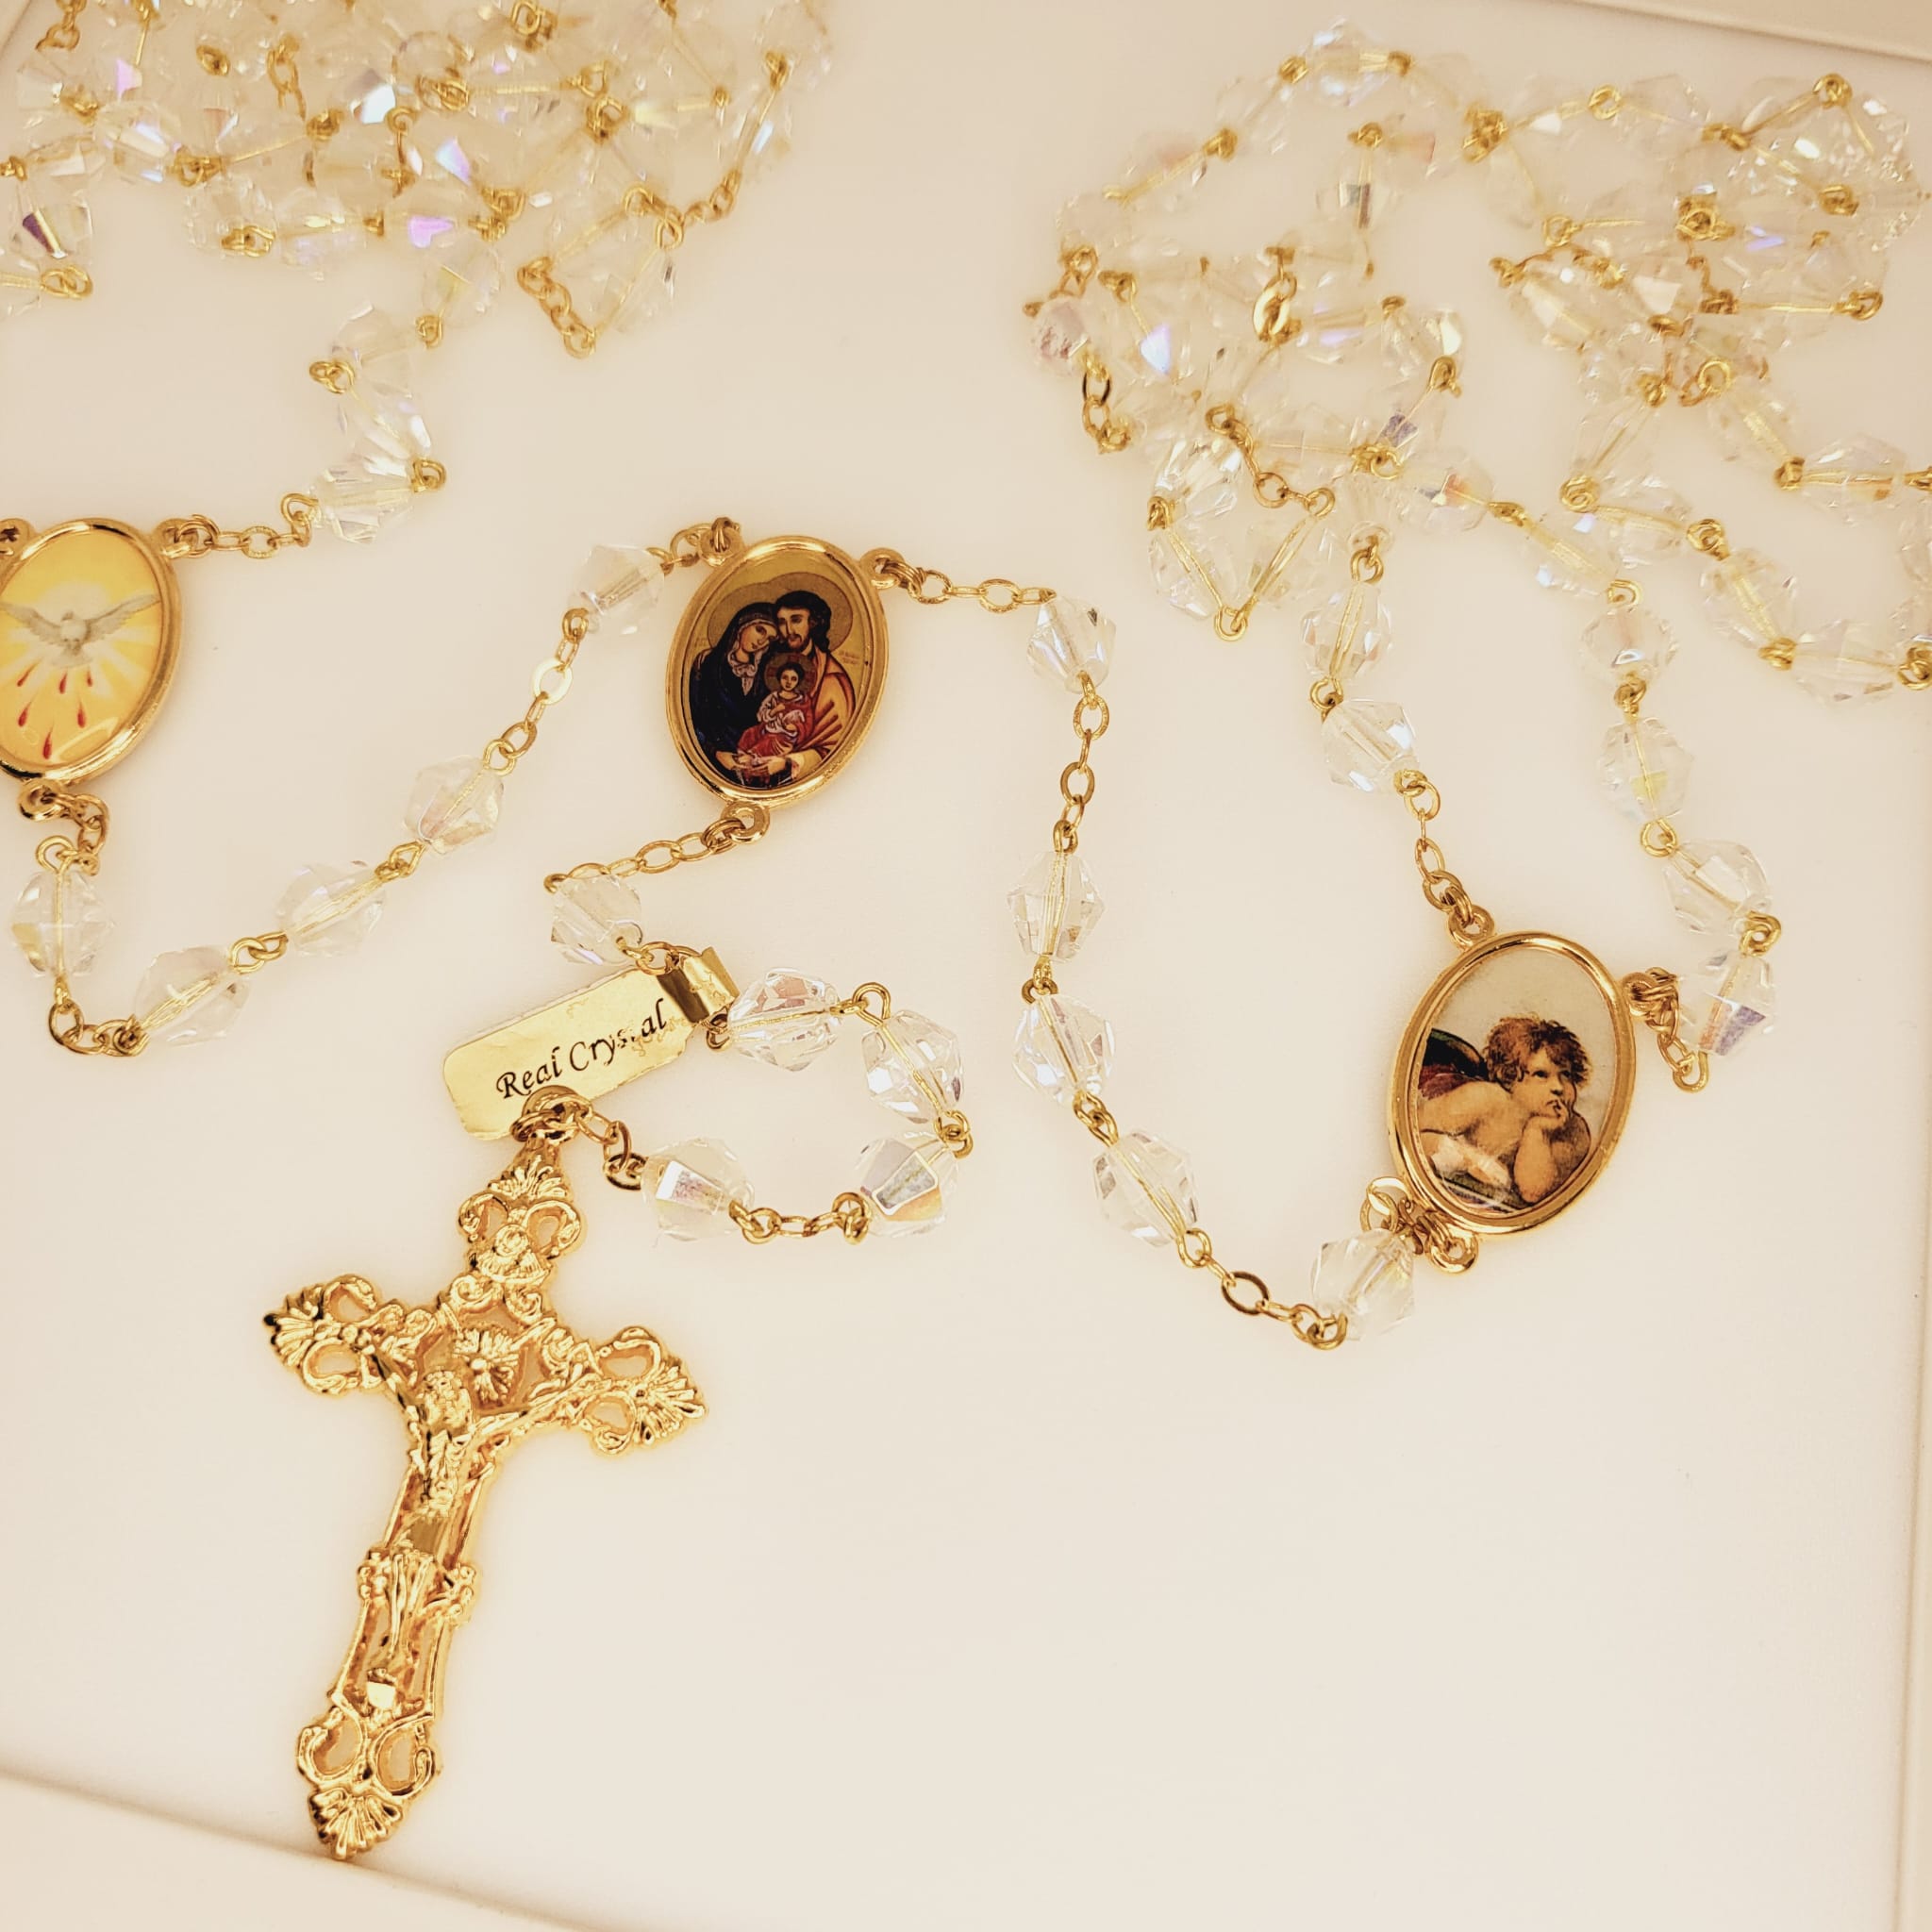 Marriage Rosary